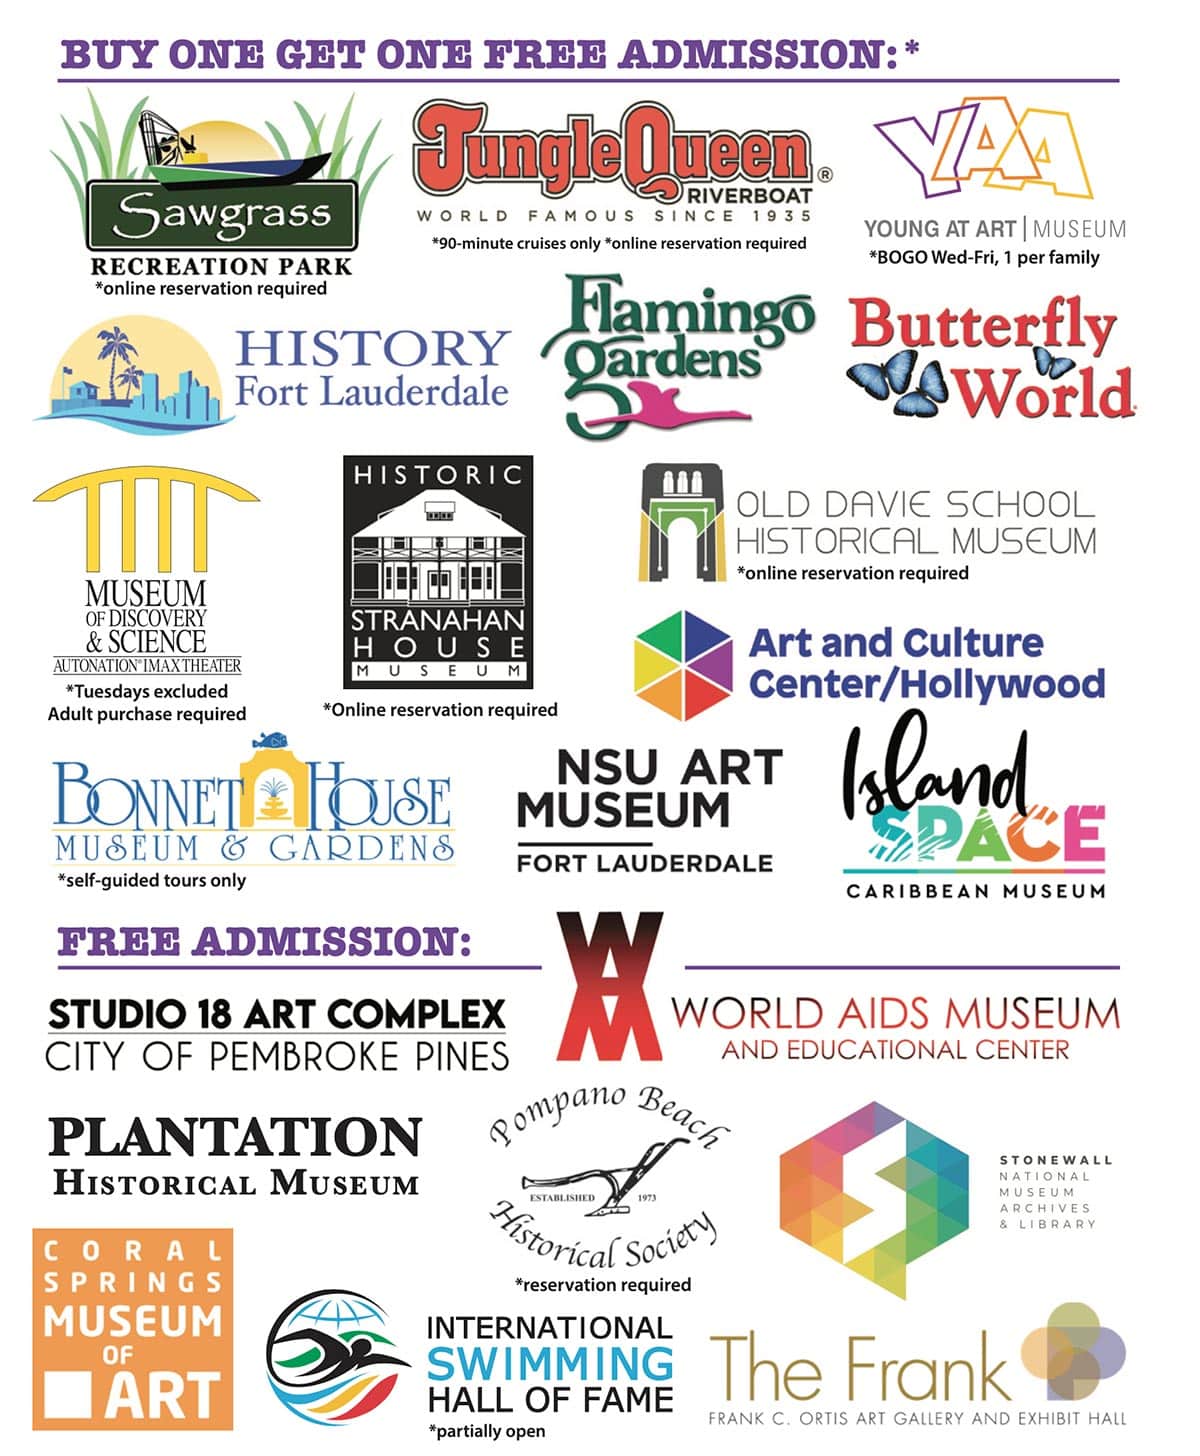 Broward Attractions and Museums Month (BAMM 2023) - September 1-30, 2023